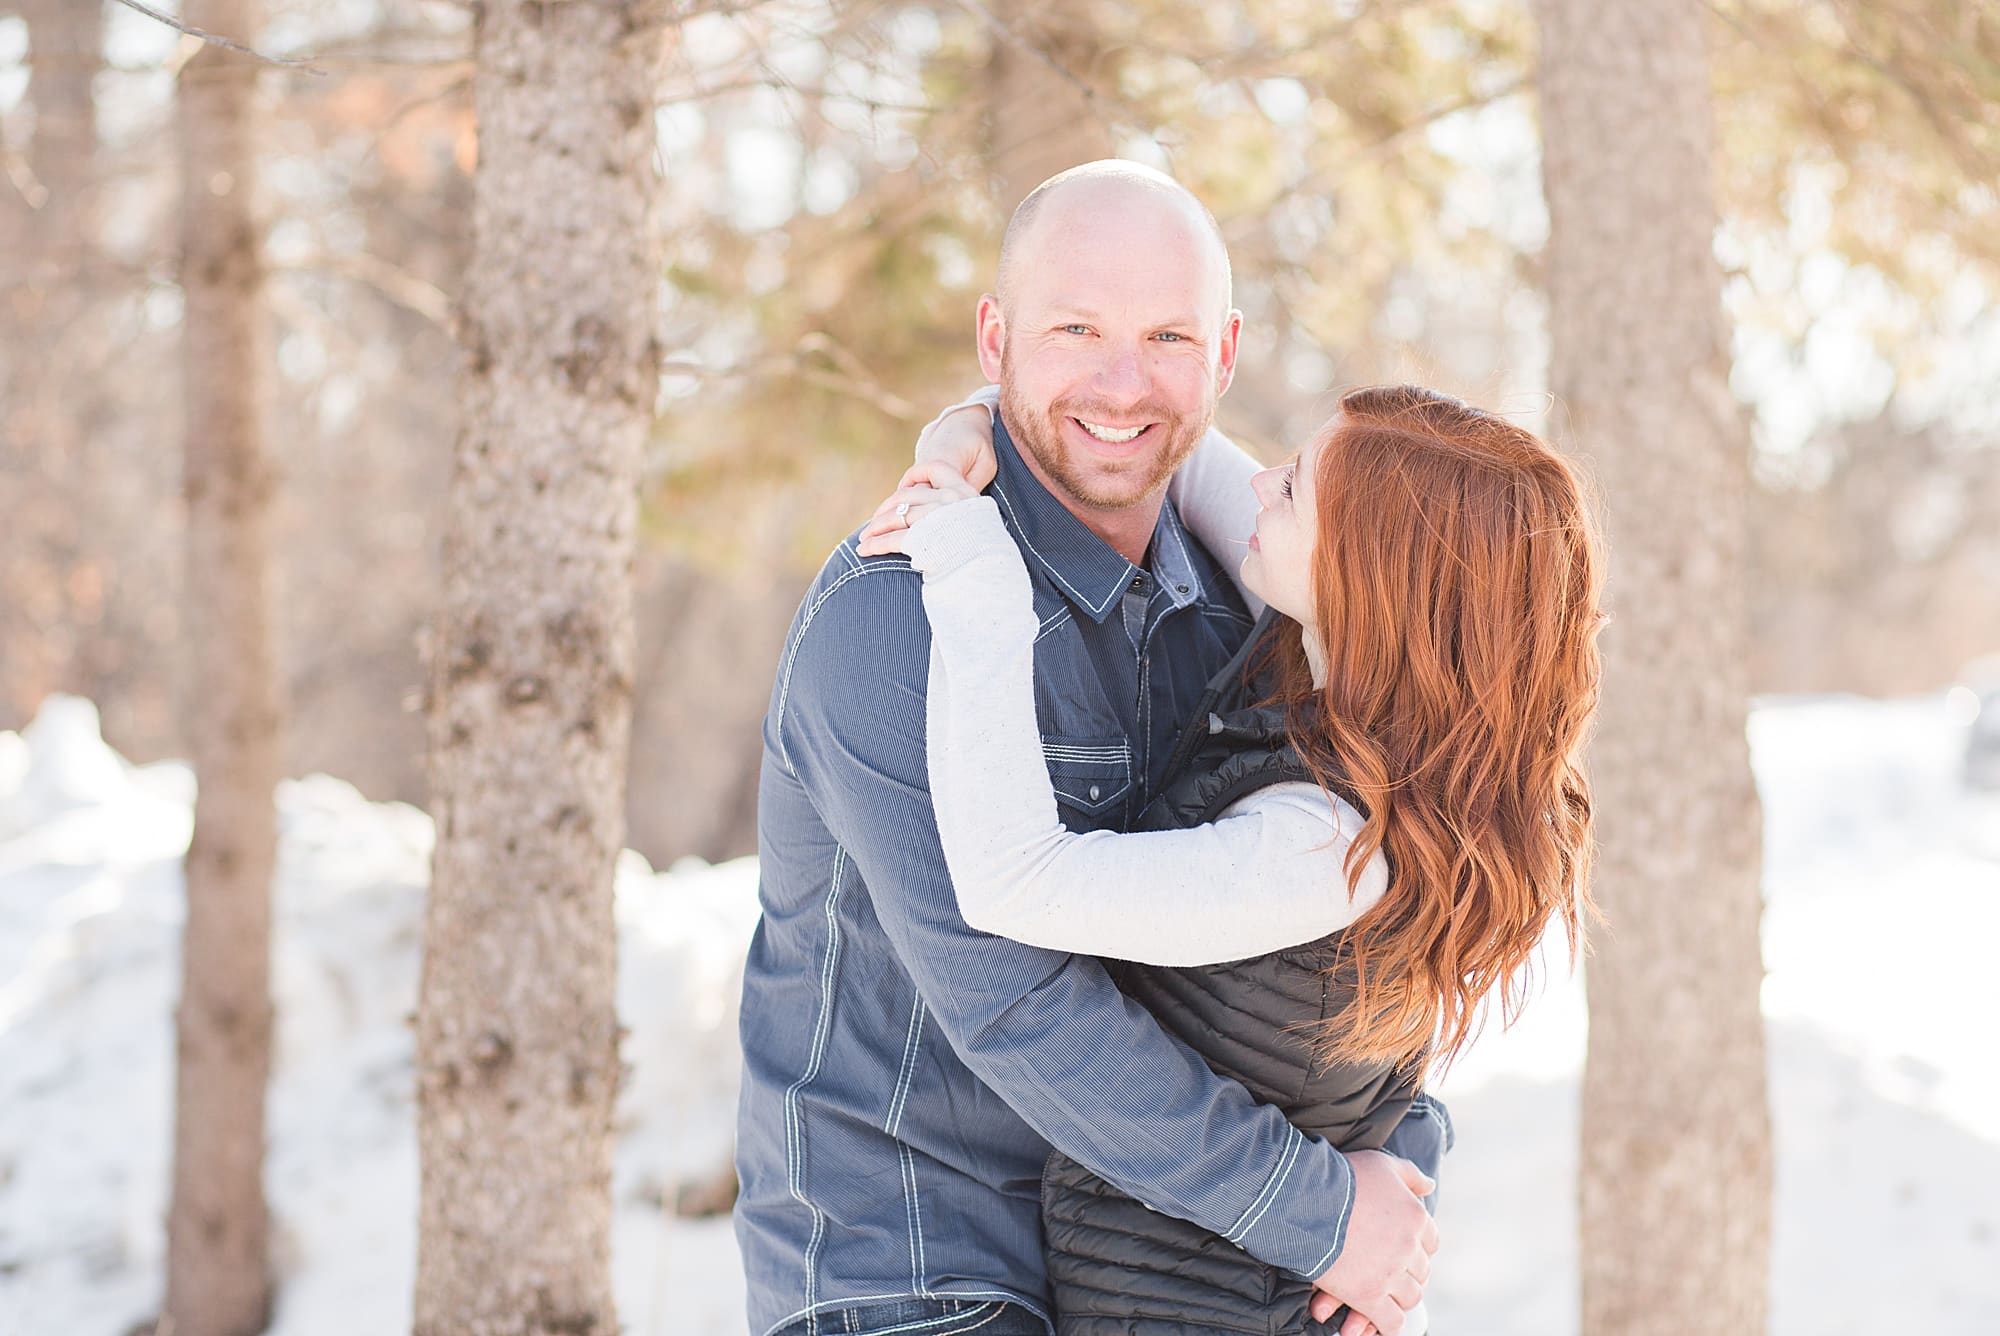 A redhead smiles up to her fiance during their sunny winter engagement session